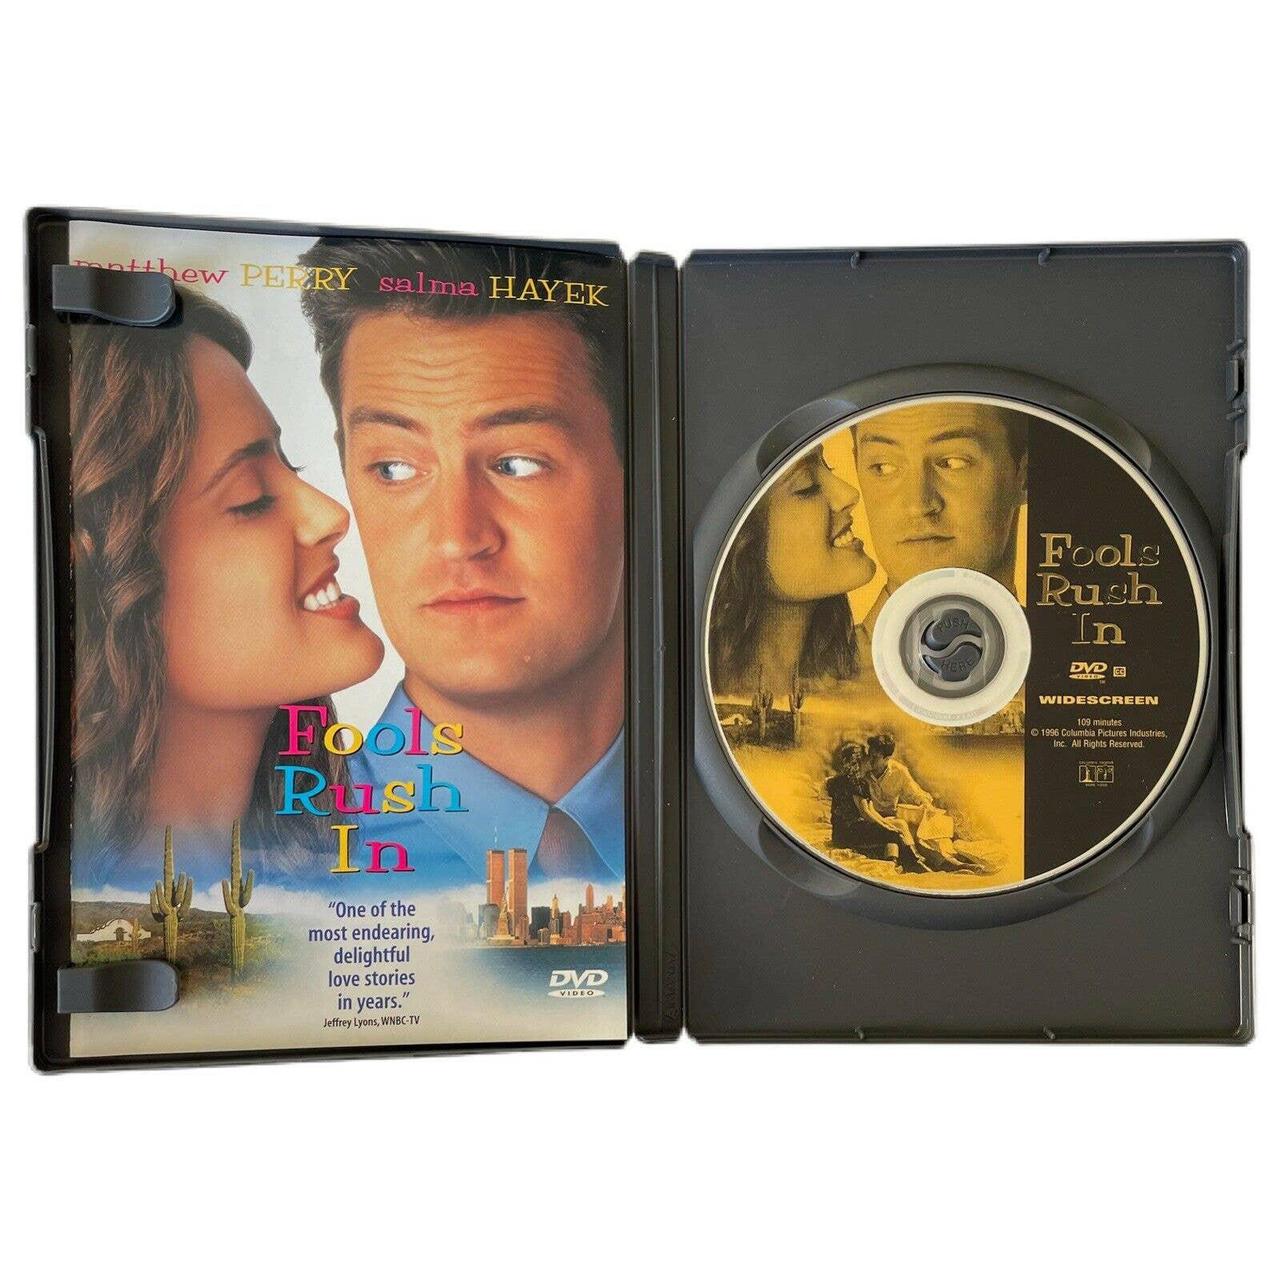 Product Image 2 - Fools Rush in (DVD, 1997).